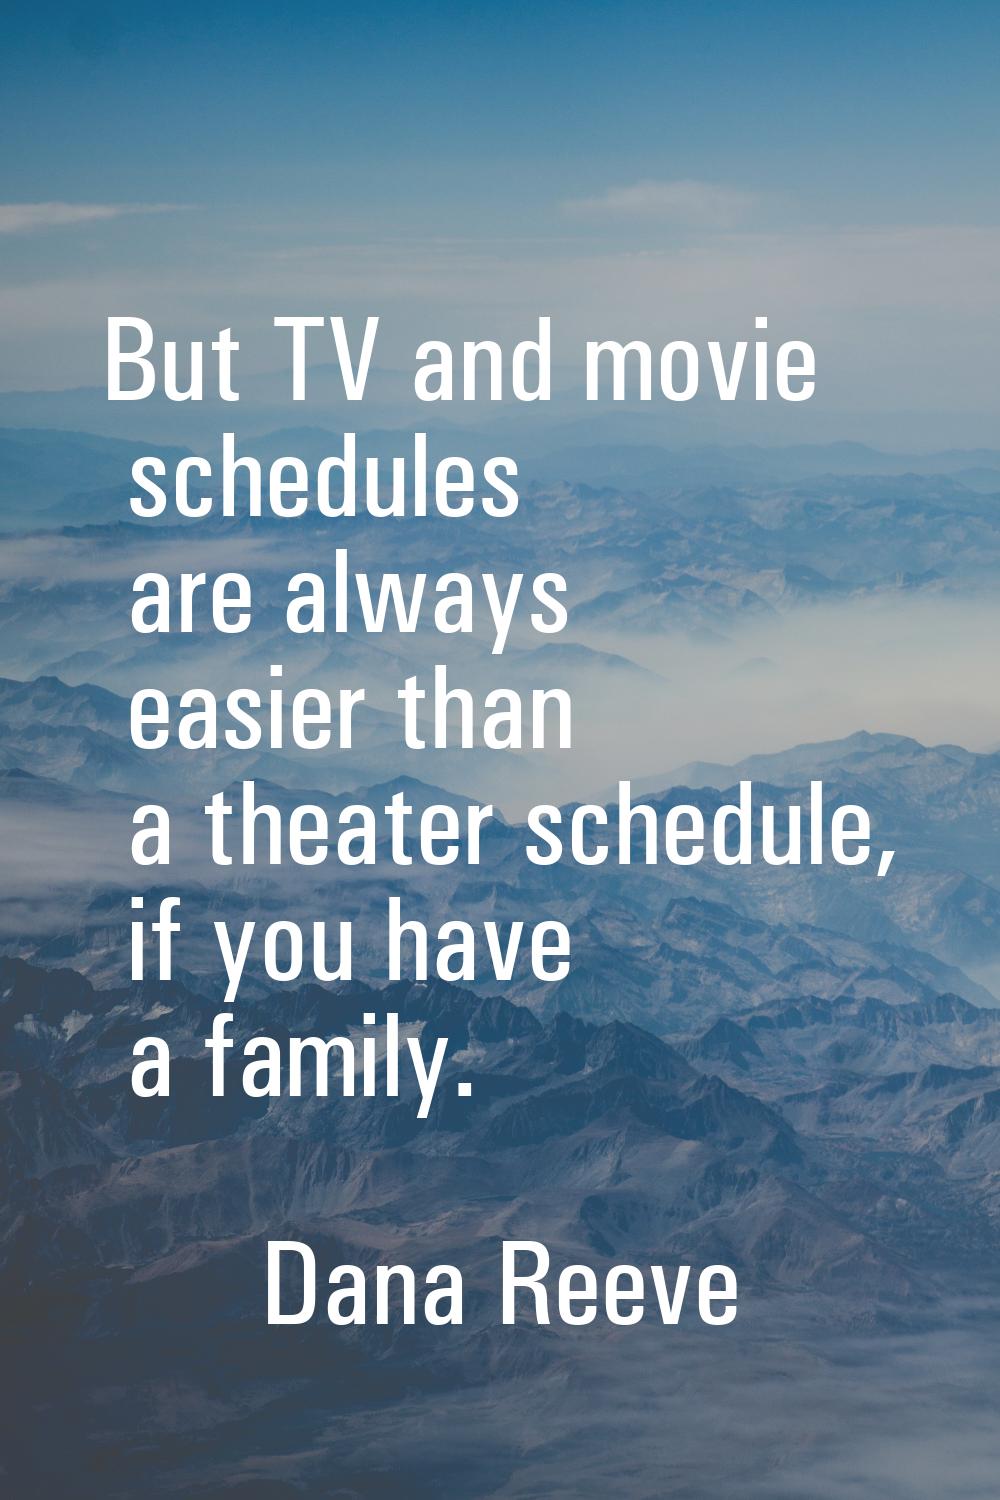 But TV and movie schedules are always easier than a theater schedule, if you have a family.